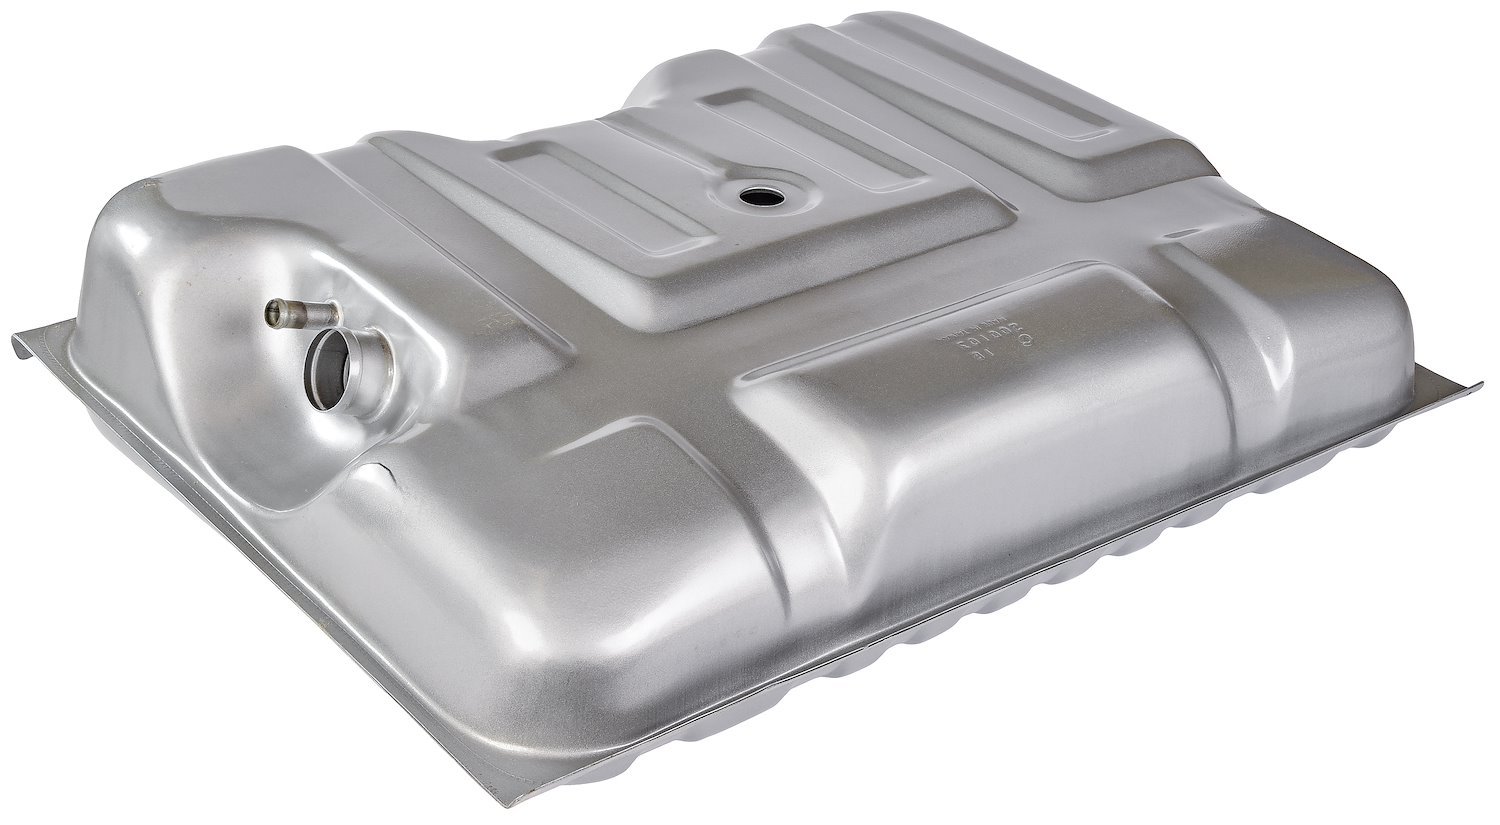 Fuel Tank compatible with Ford F-Series 73-79 Mounts Behind Rear Axle W/Roll-Over Valve 19 Gallon Capacity 